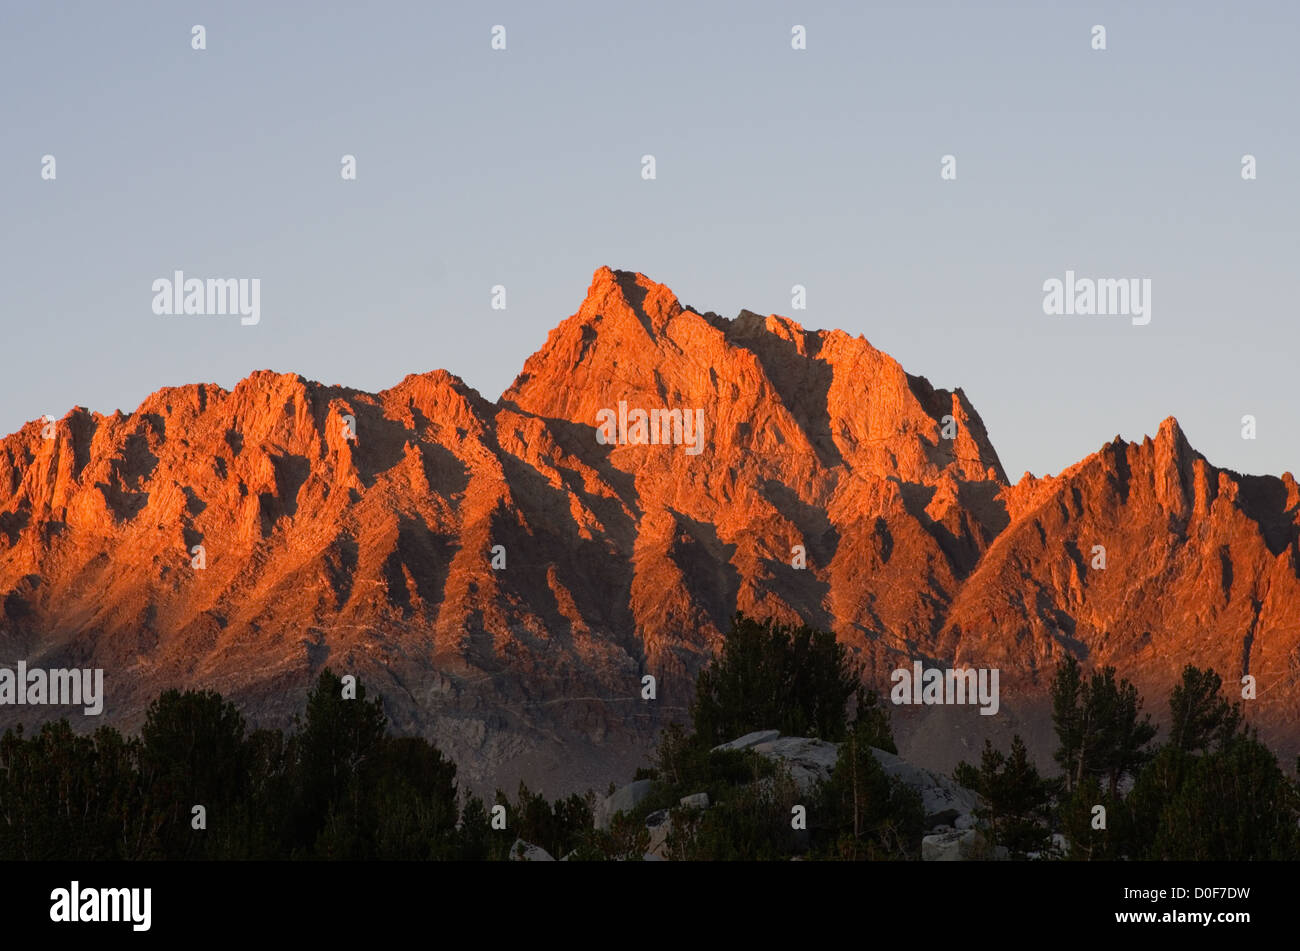 Mount Humphreys sunset with orange alpenglow from the Humphreys Basin in the Sierra Nevada mountains Stock Photo